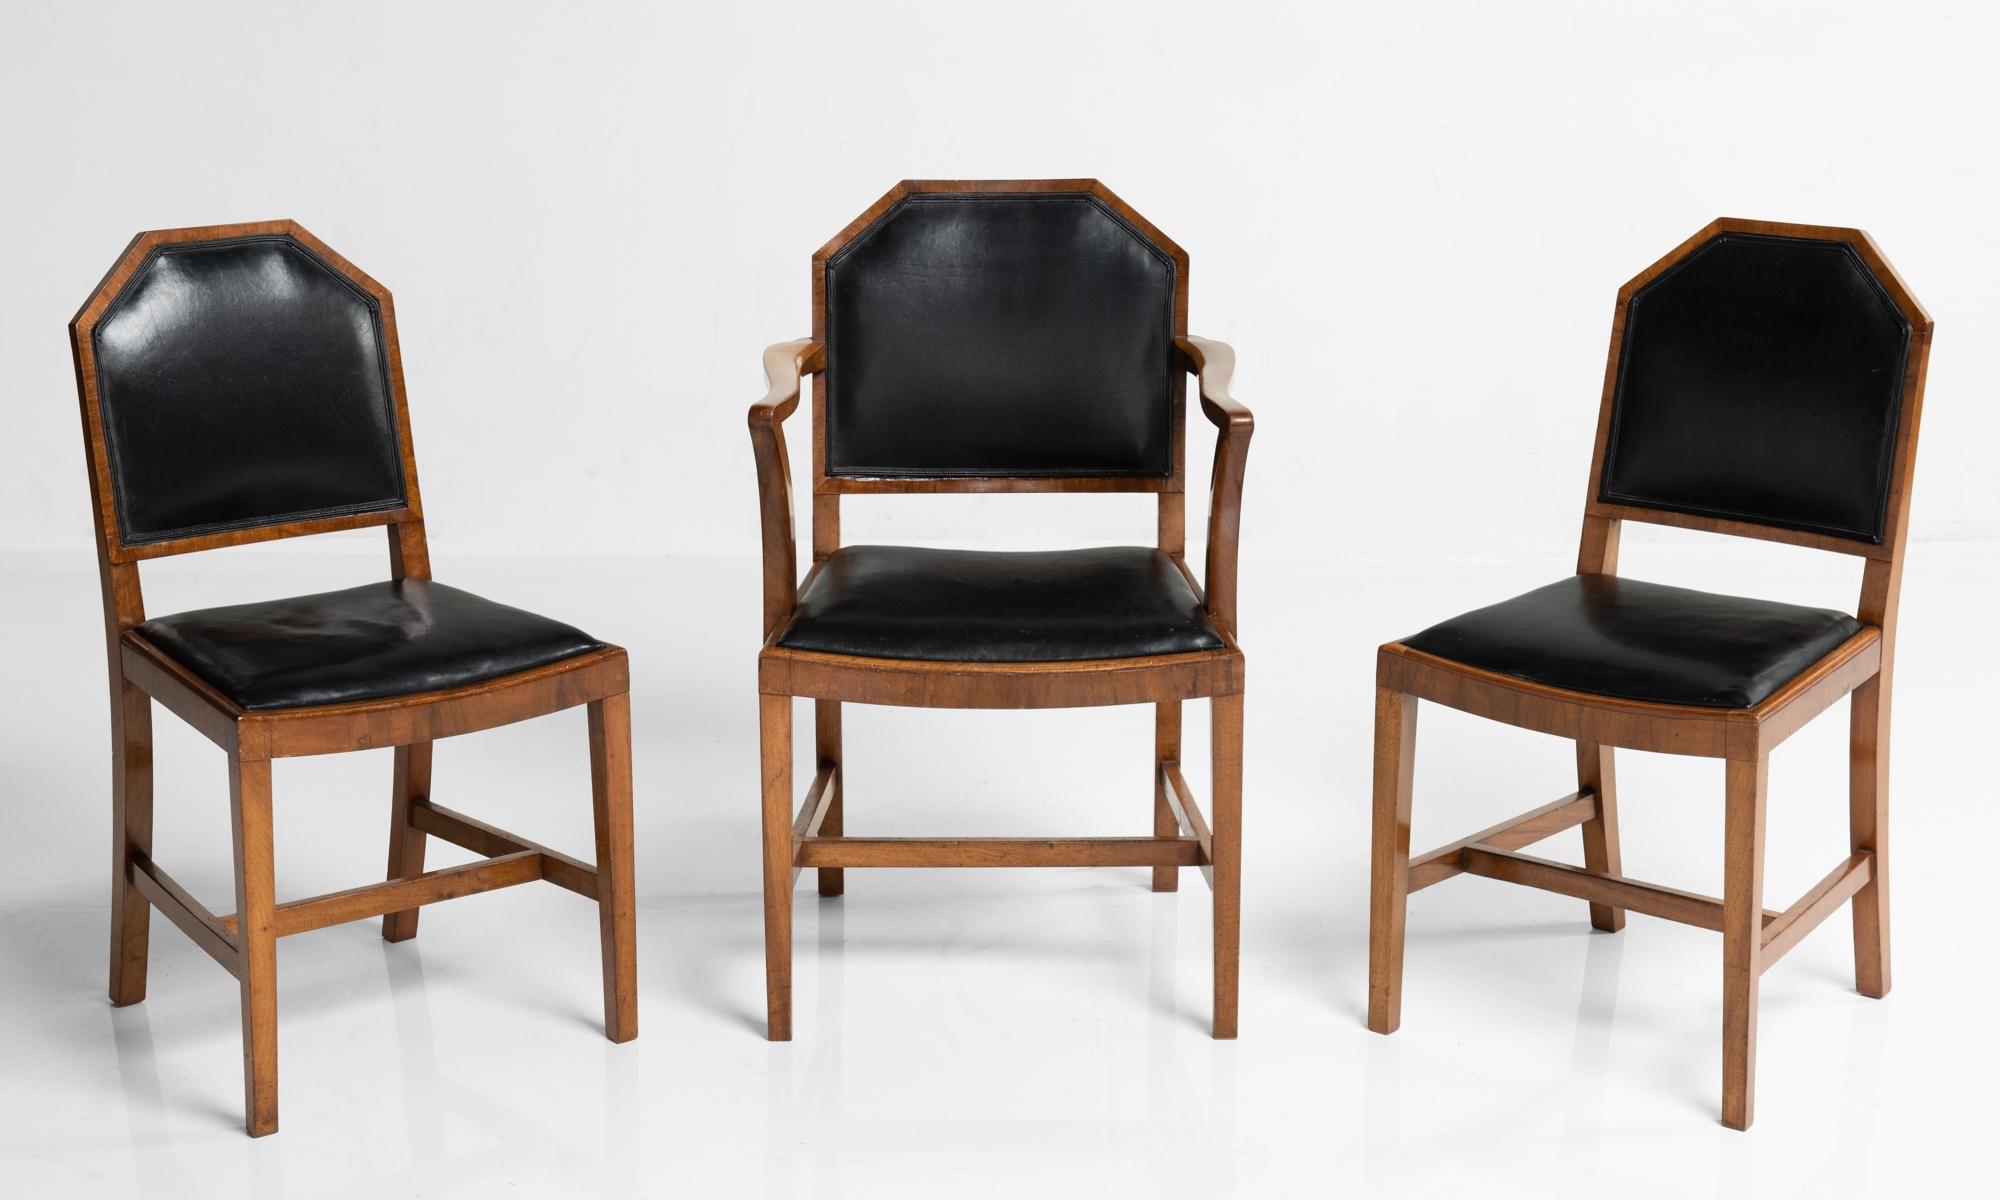 Edwardian Walnut and Leather Dining Chairs by Heals of London, England, circa 1915